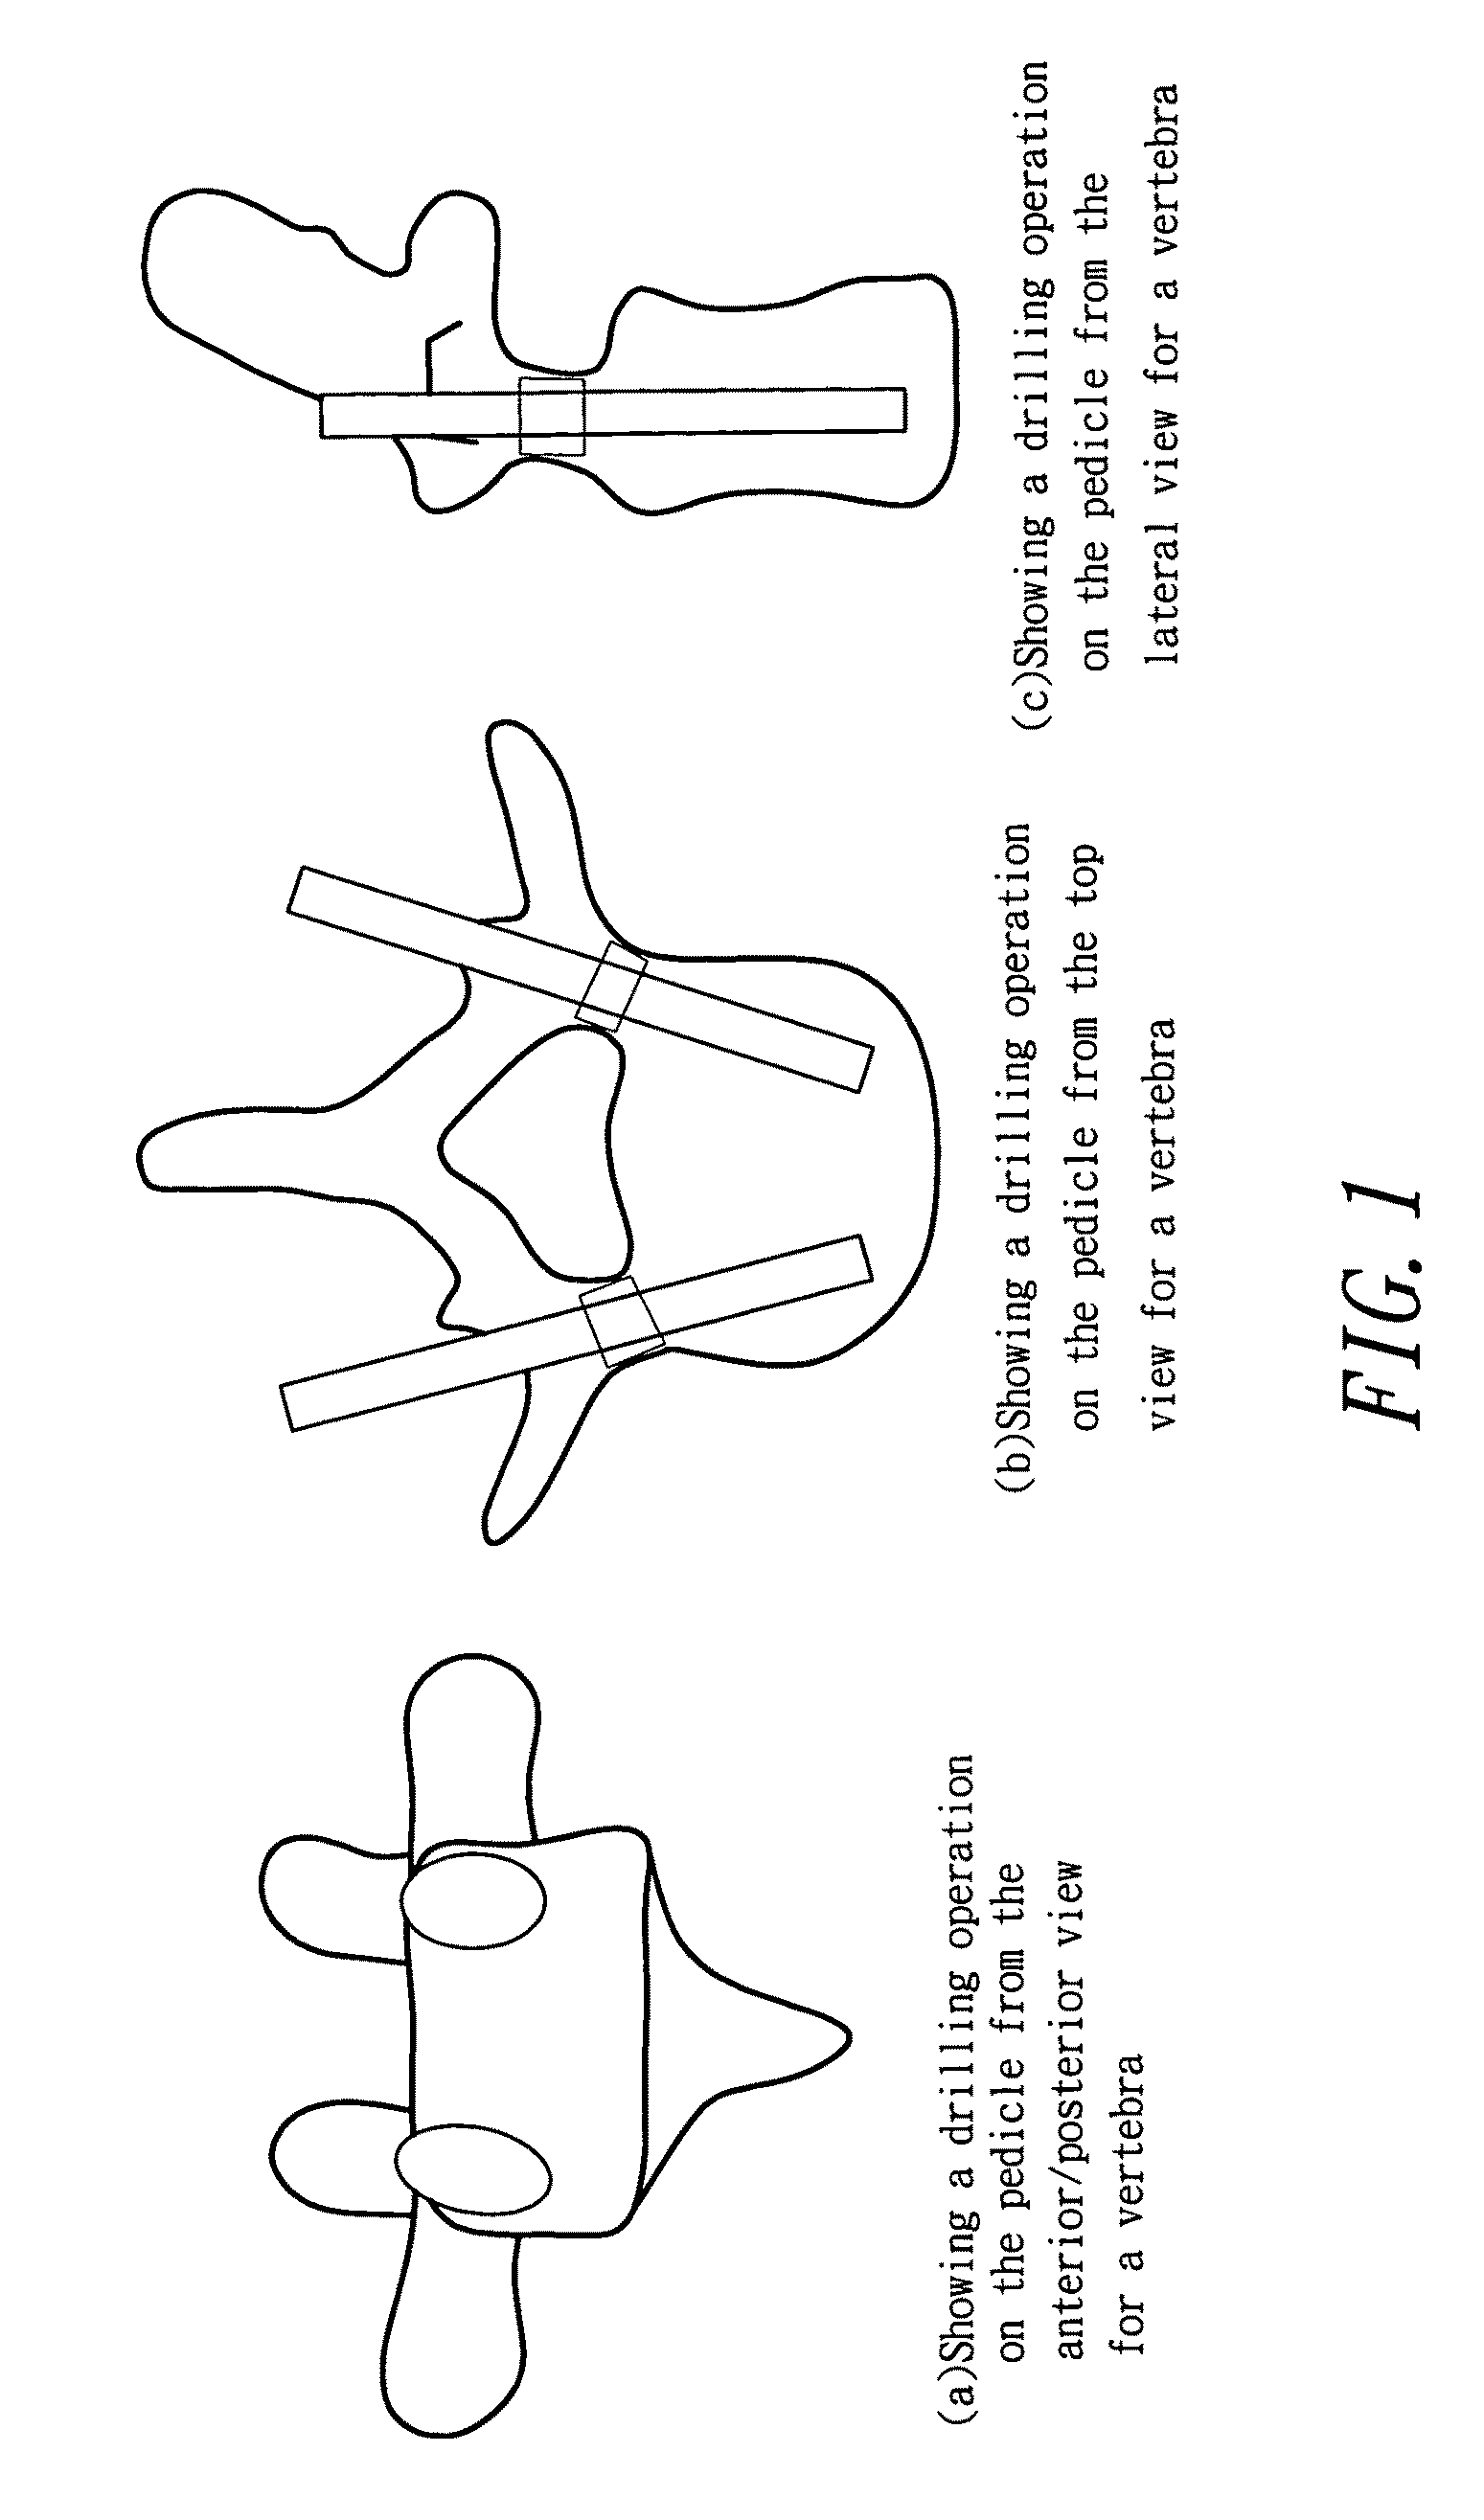 Navigation method and system for drilling operation in spinal surgery